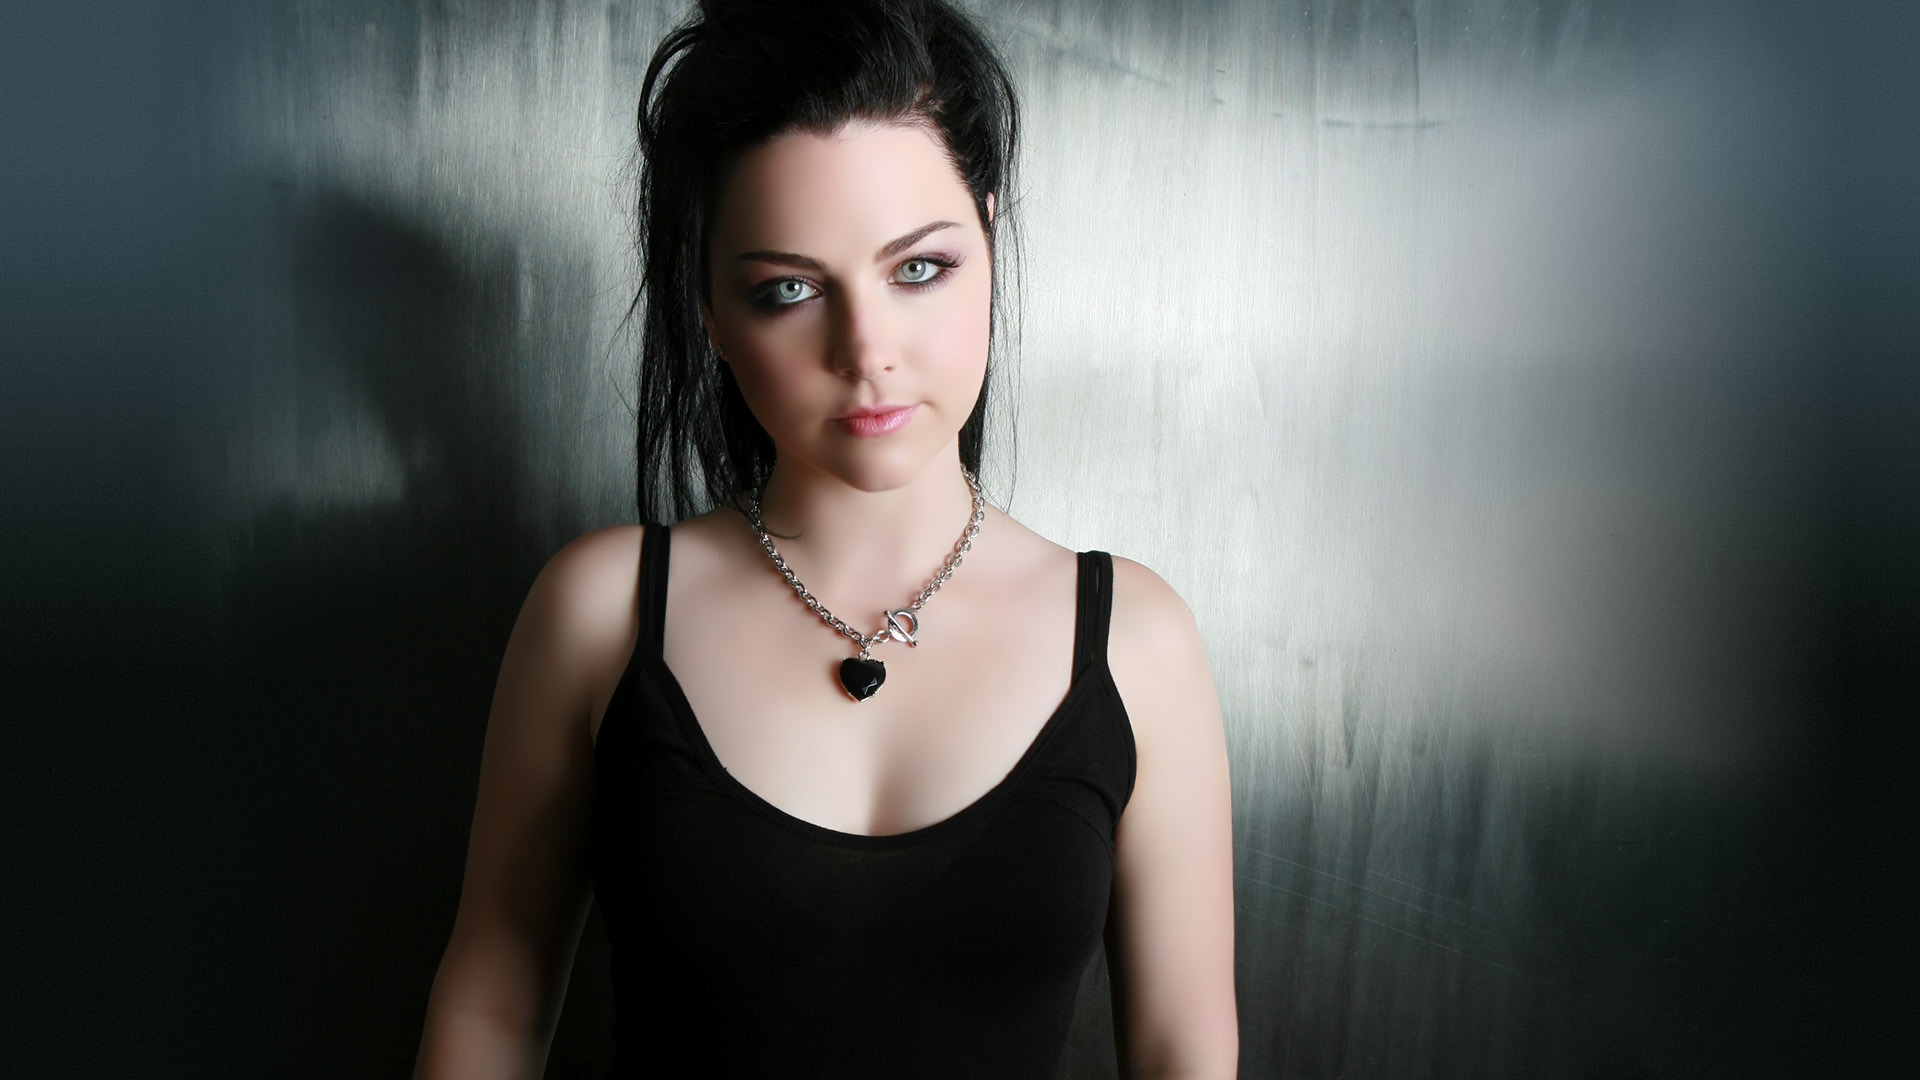 Amy Lee for 1920 x 1080 HDTV 1080p resolution